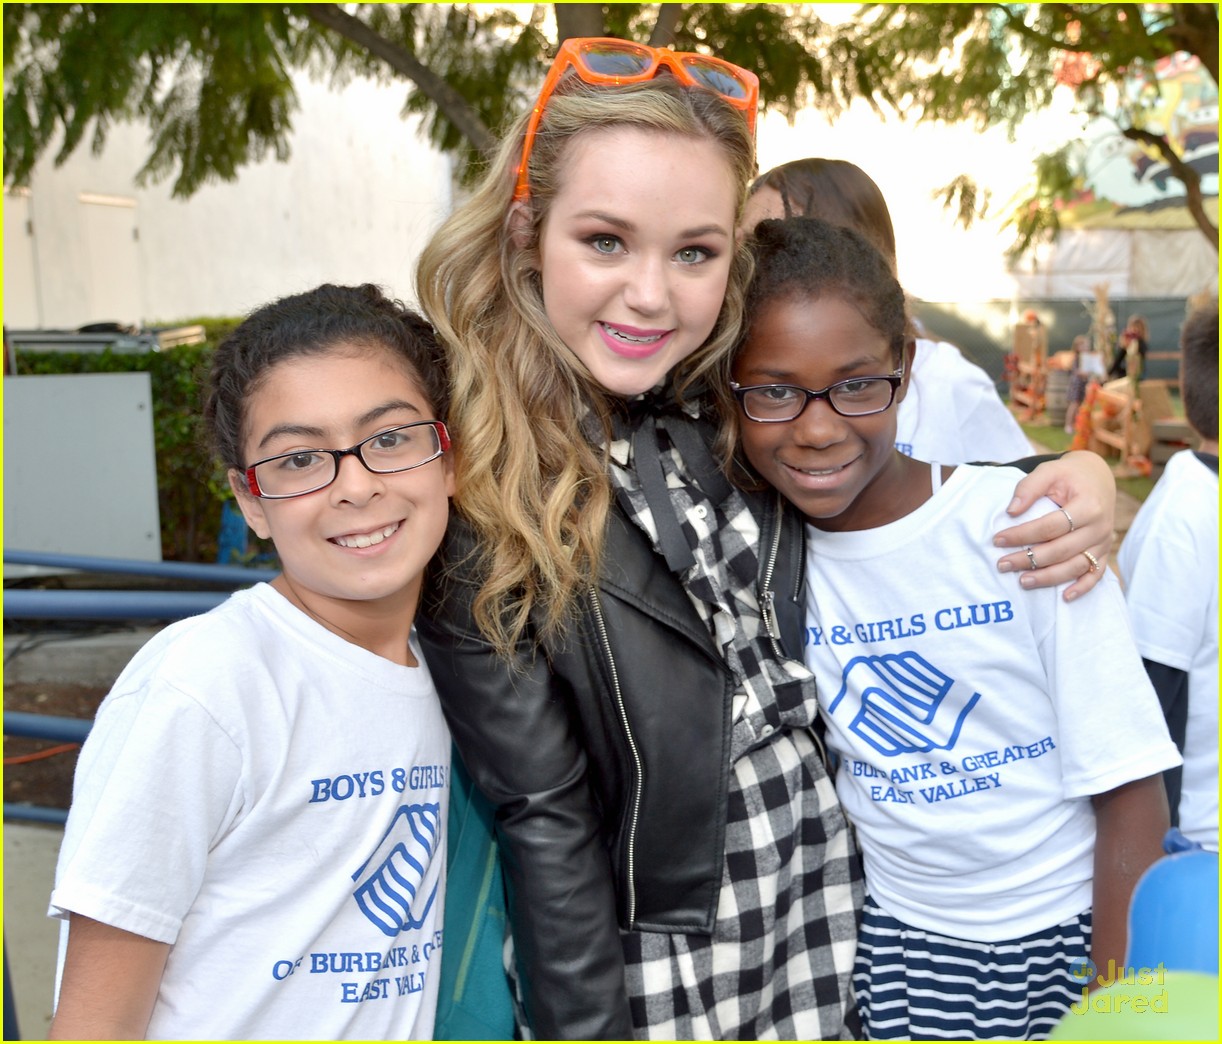 Full Sized Photo Of Brec Bassinger Game Shakers Halloween Event Excl Pics 12 Brec Bassinger